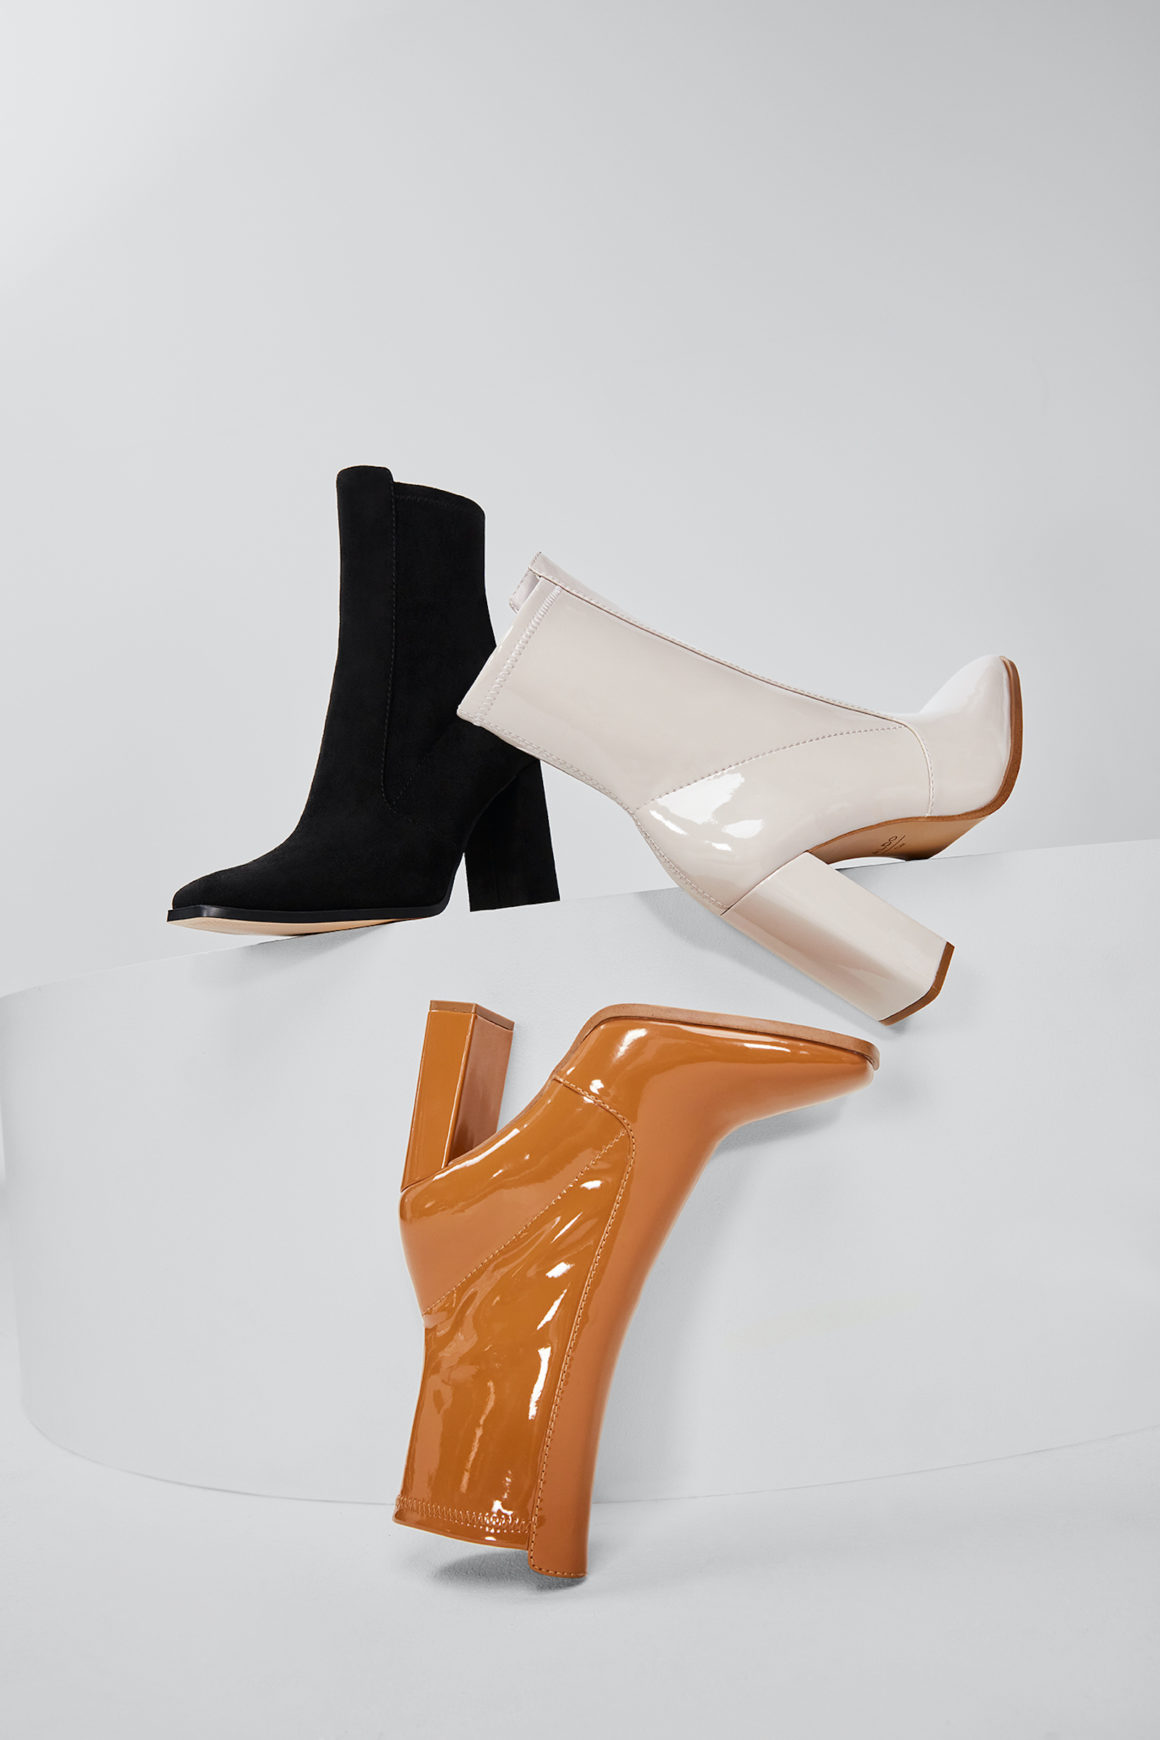 Fall booties from Aldo's New Fall Collection